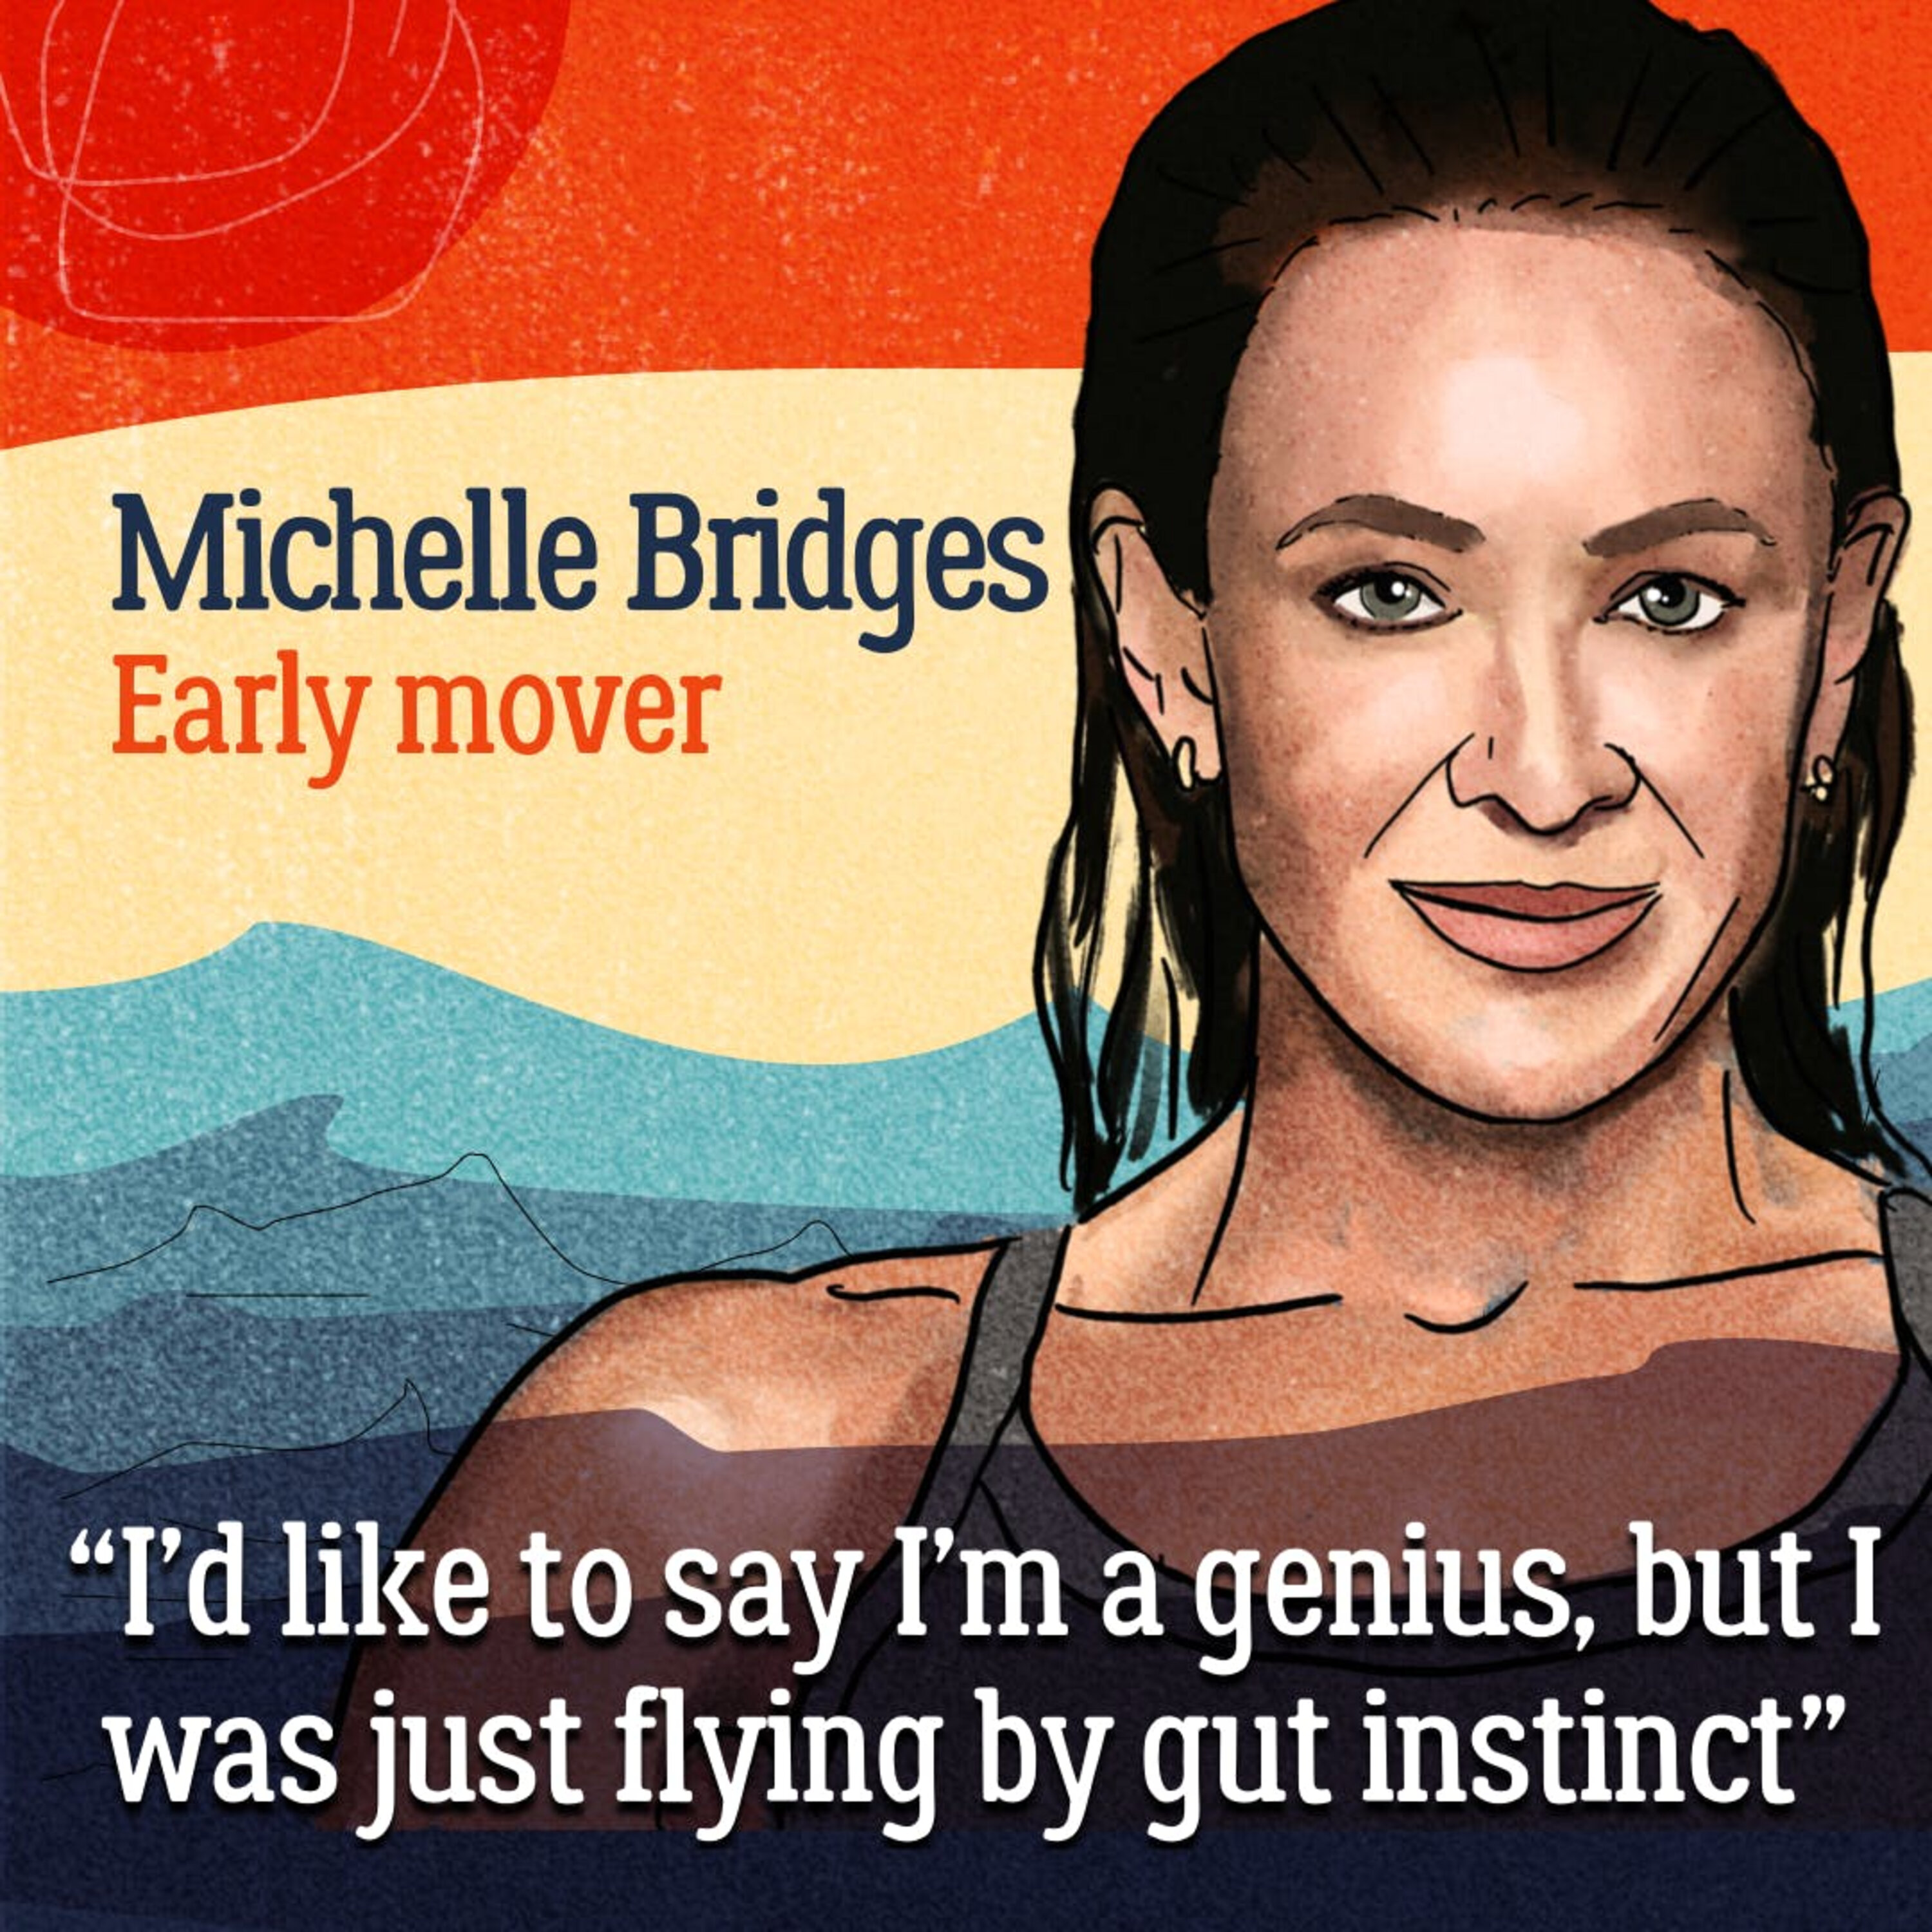 Sweat and tears – How Michelle Bridges built an empire based on grit